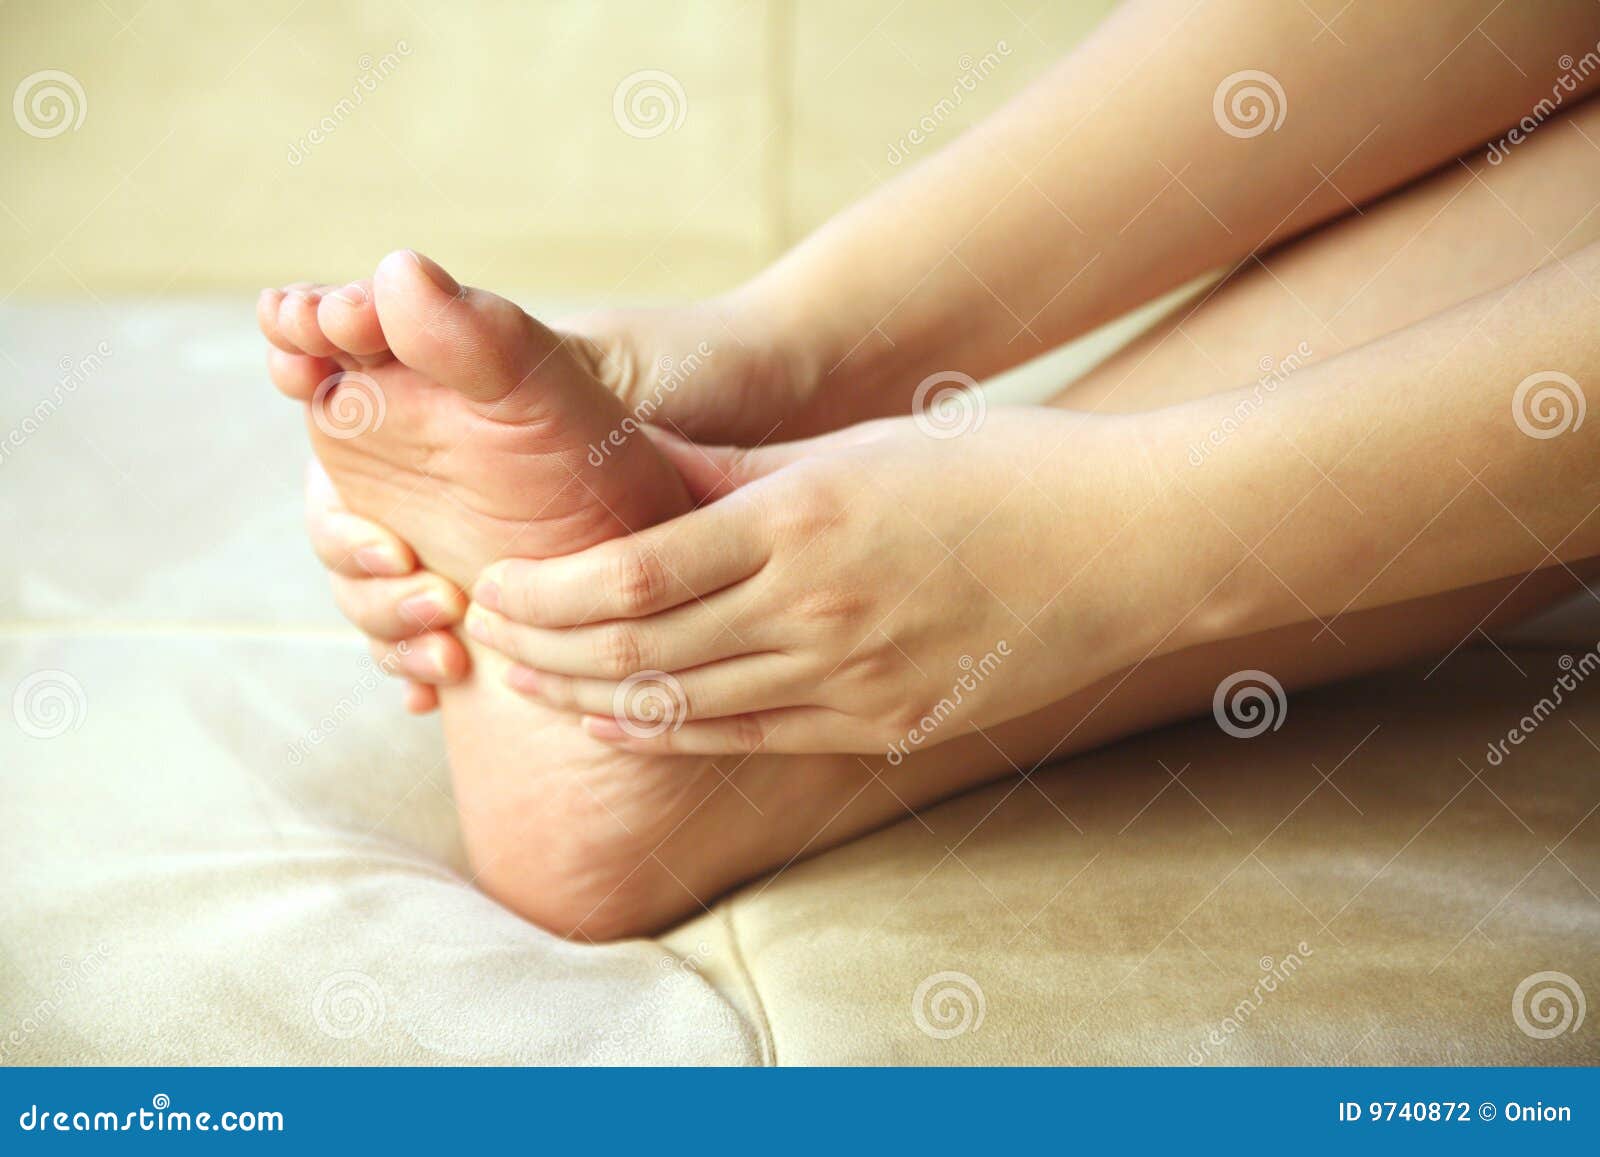 Girl Giving Herself A Foot Massage Stock Photography Image 9740872